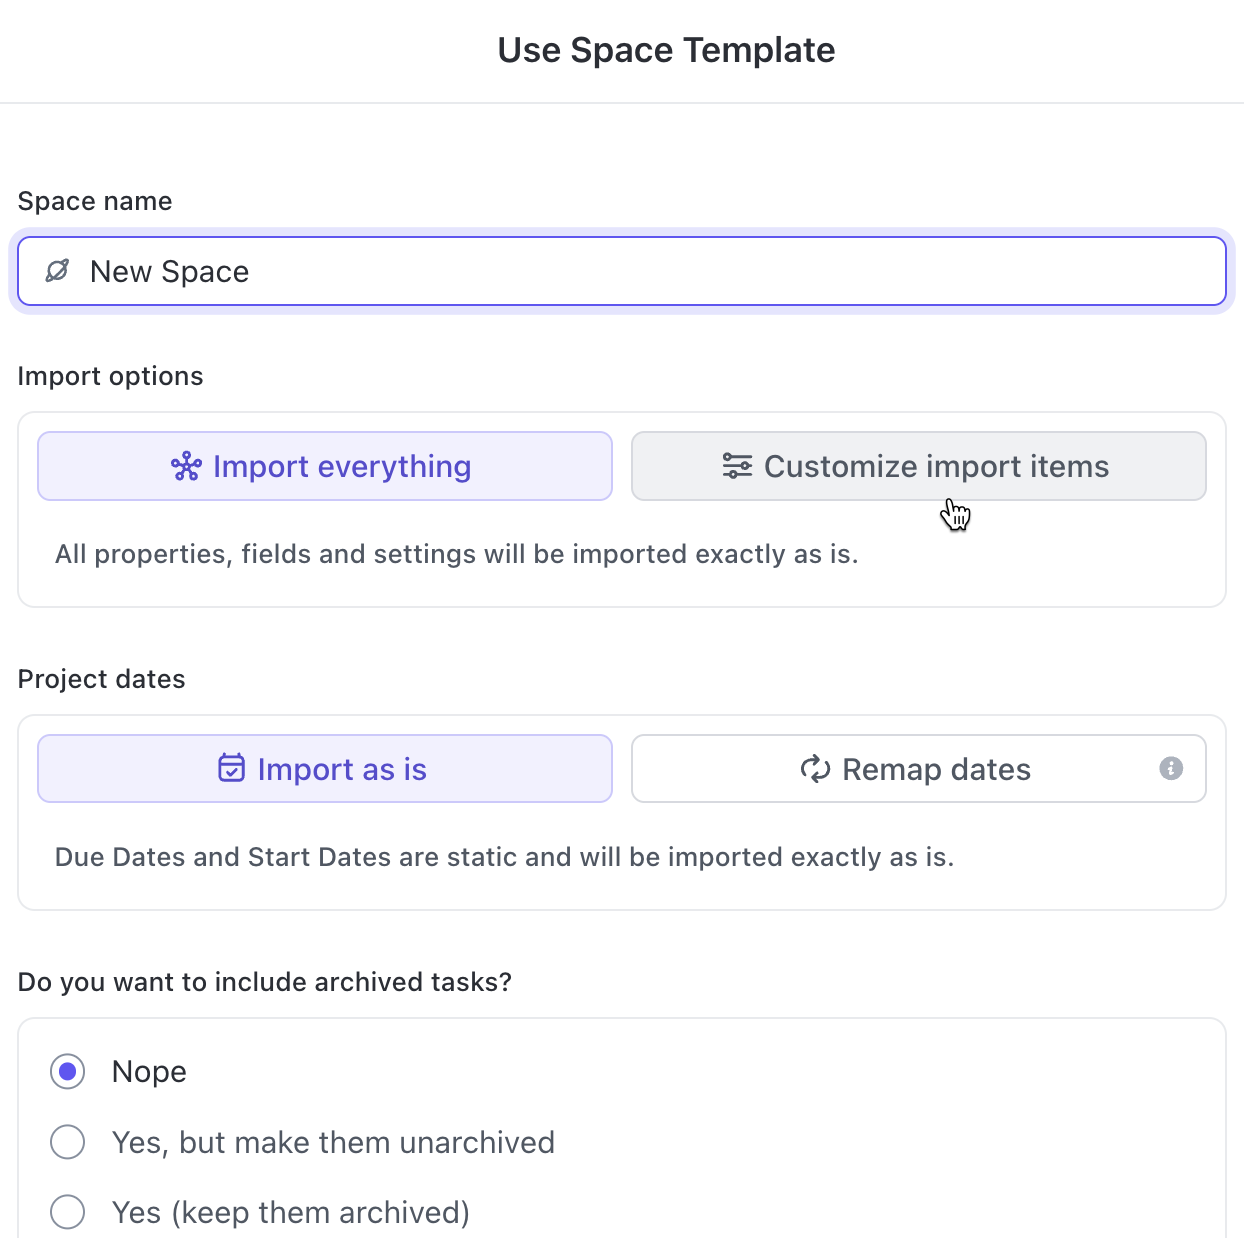 Screenshot of the Use Space Template modal.